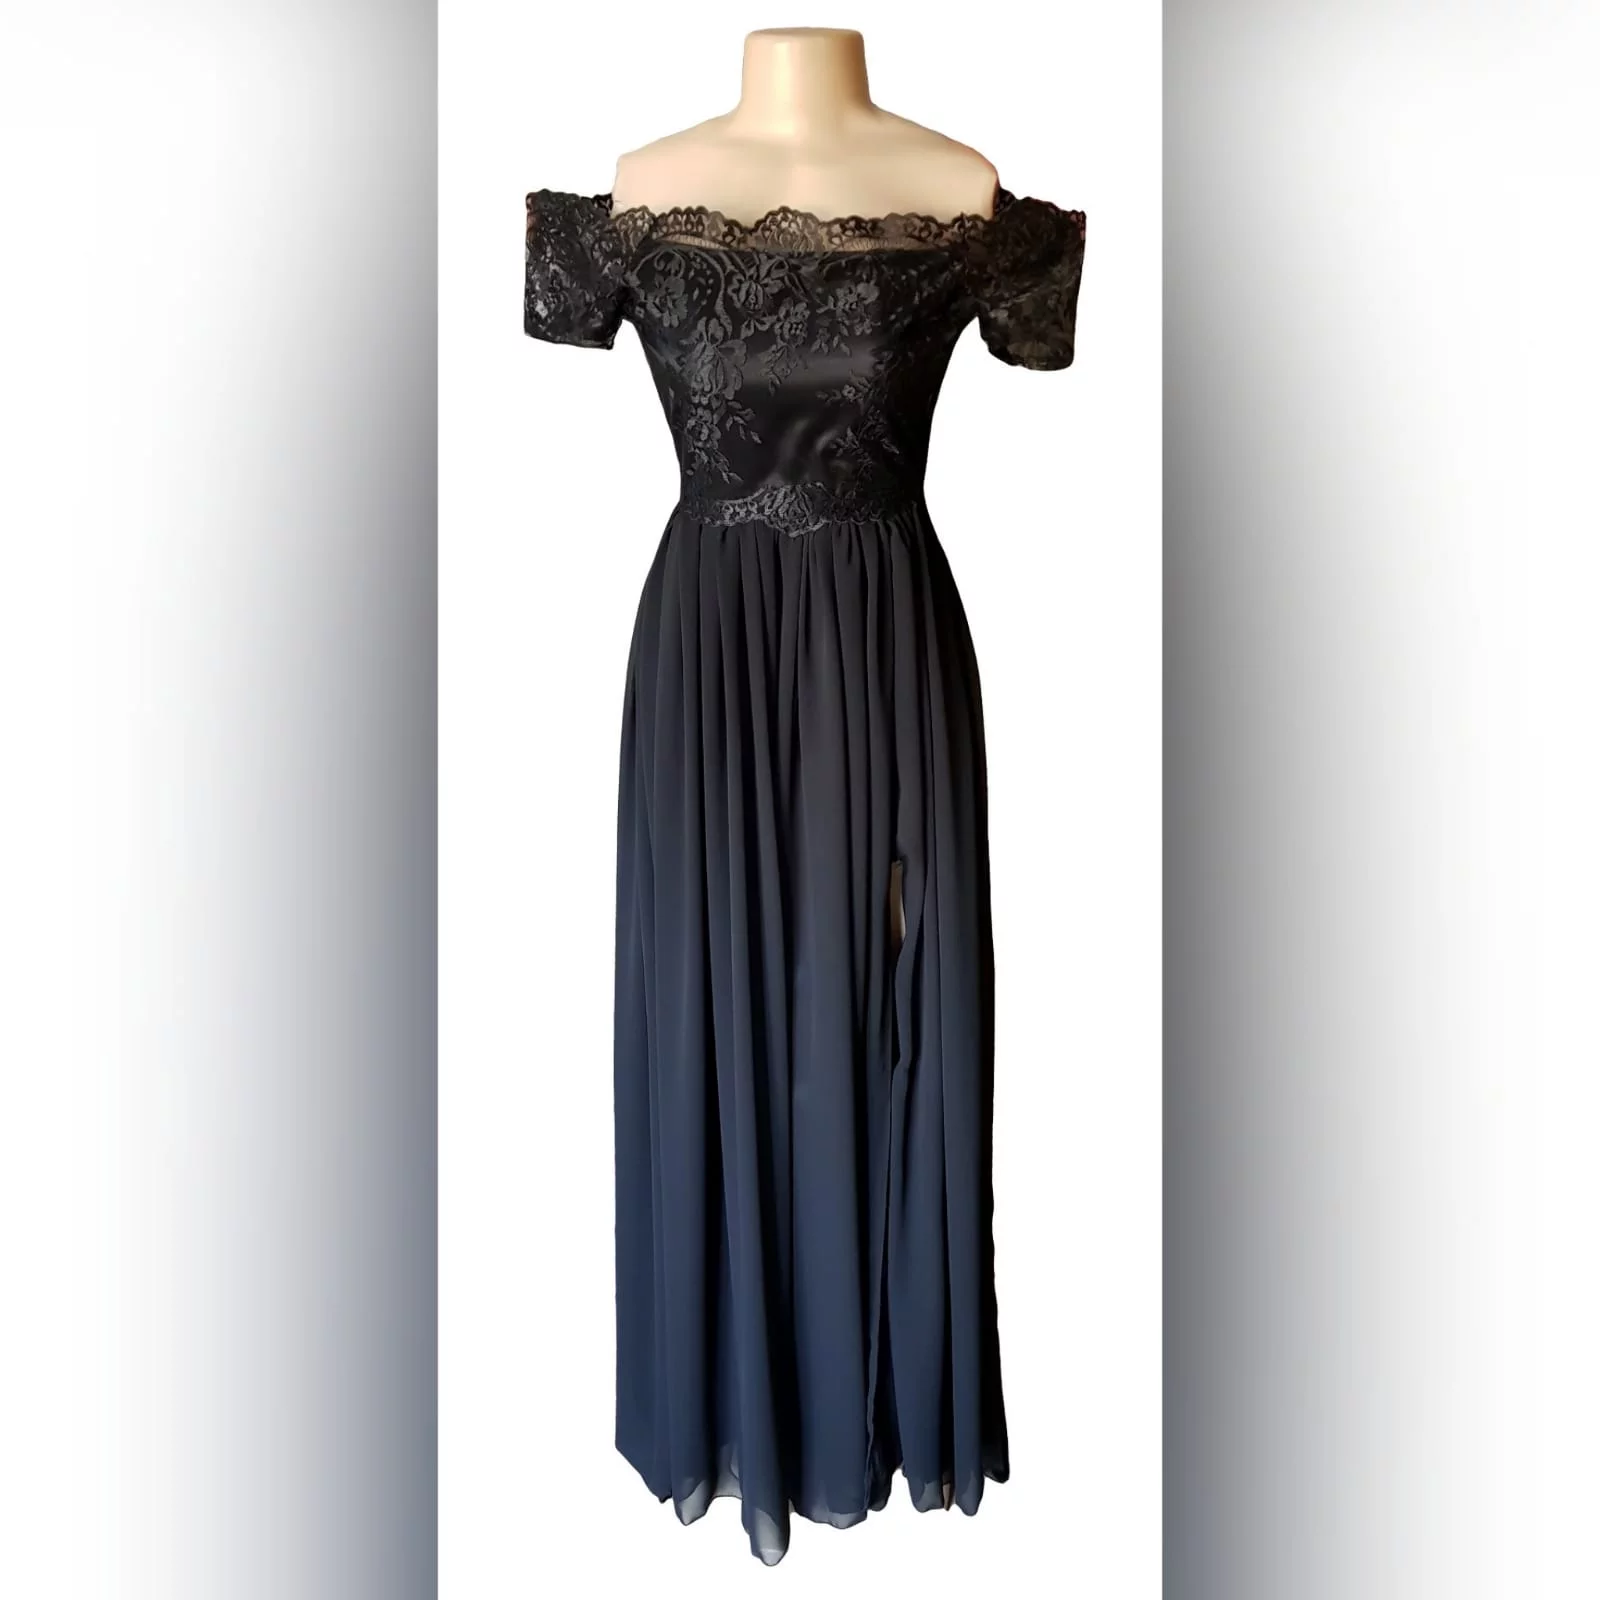 Long black prom dress with gathered chiffon 4 simple long black prom dress with gathered chiffon and a slit. Off shoulder lace bodice with a sheer back detailed with buttons and short cap sleeves.